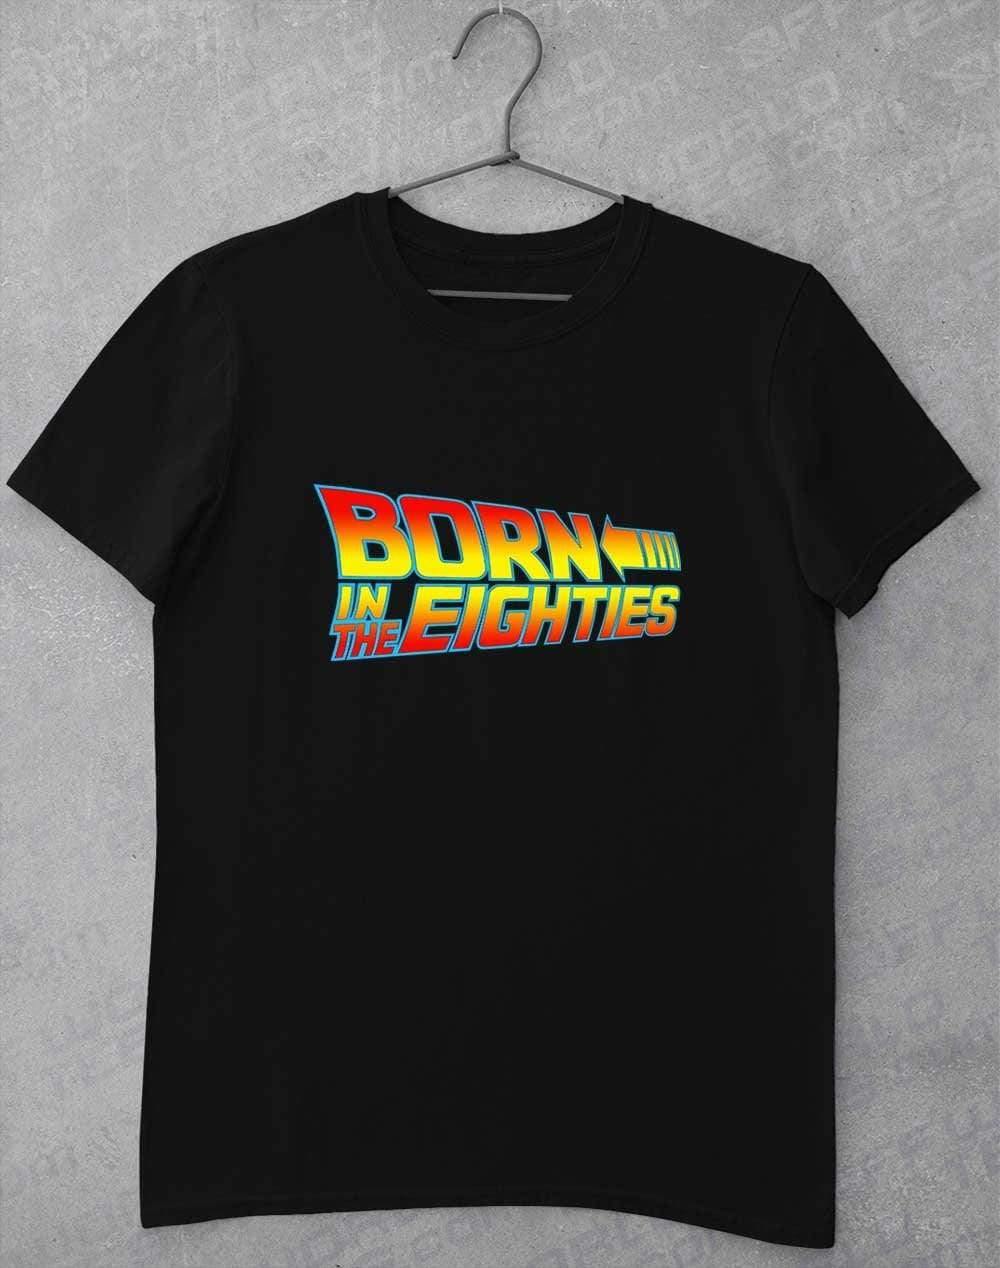 Born in the... (CHOOSE YOUR DECADE!) T-shirt THE EIGHTIES - Black / S  - Off World Tees